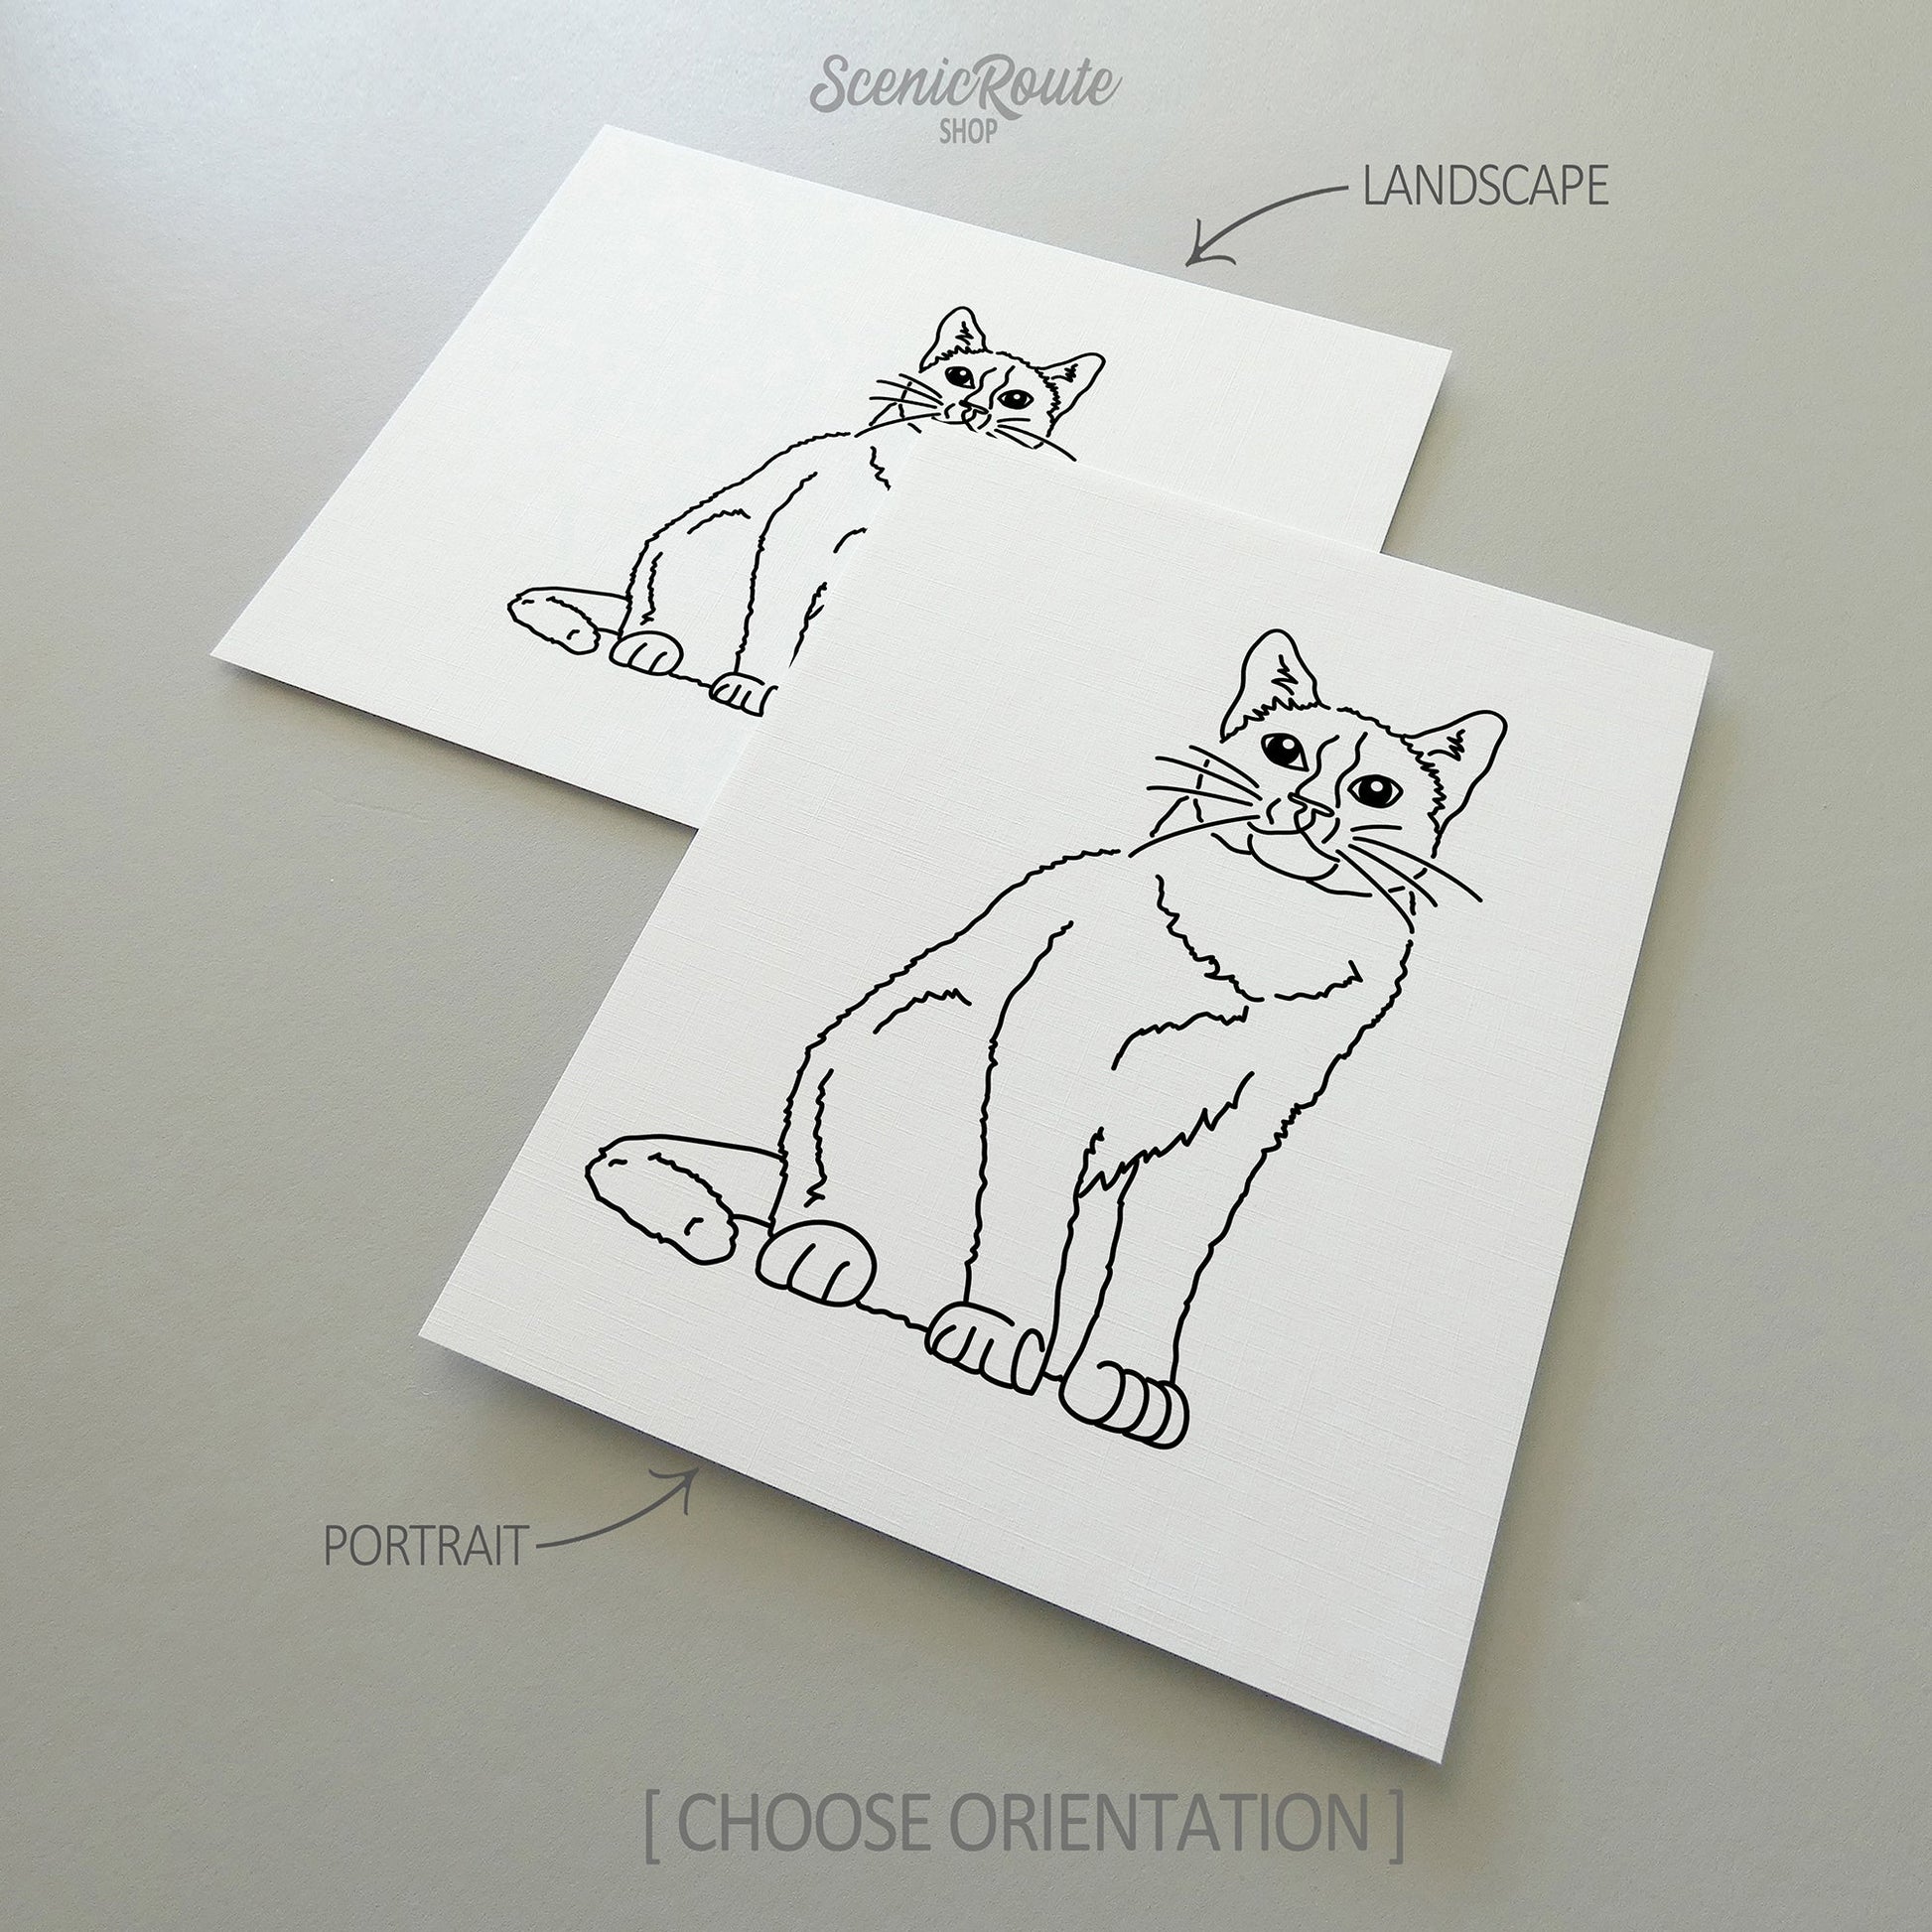 Two line art drawings of a Snowshoe cat on white linen paper with a gray background.  The pieces are shown in portrait and landscape orientation for the available art print options.